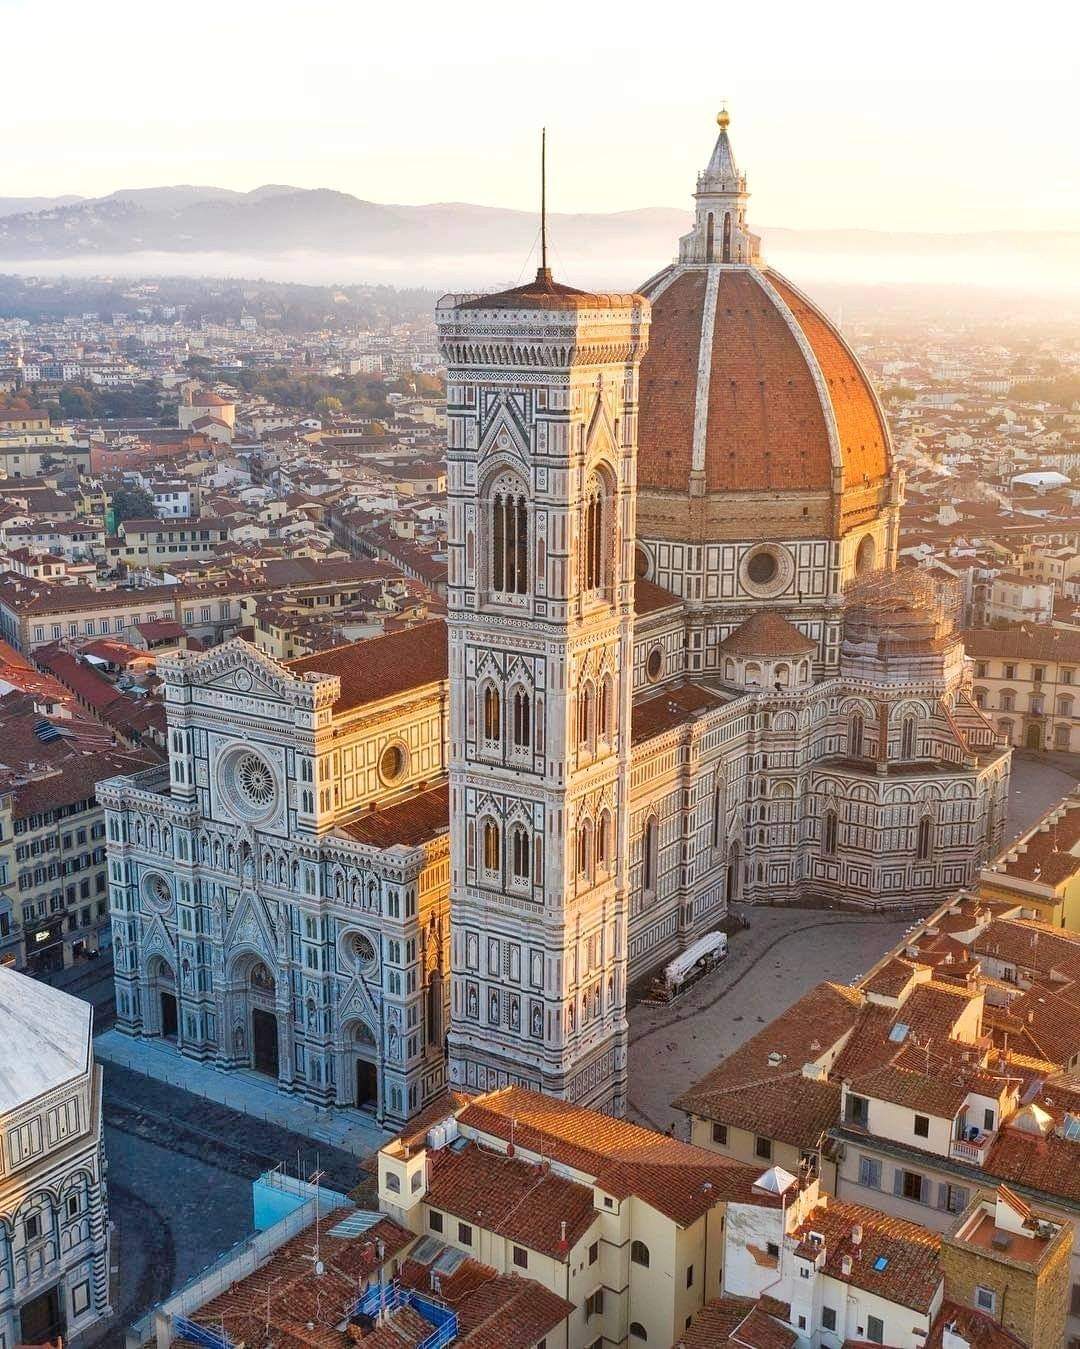 Cathedral of Santa Maria del Fiore, Florence, Tuscany (Photo credit to IG secretagent_wesanderson)